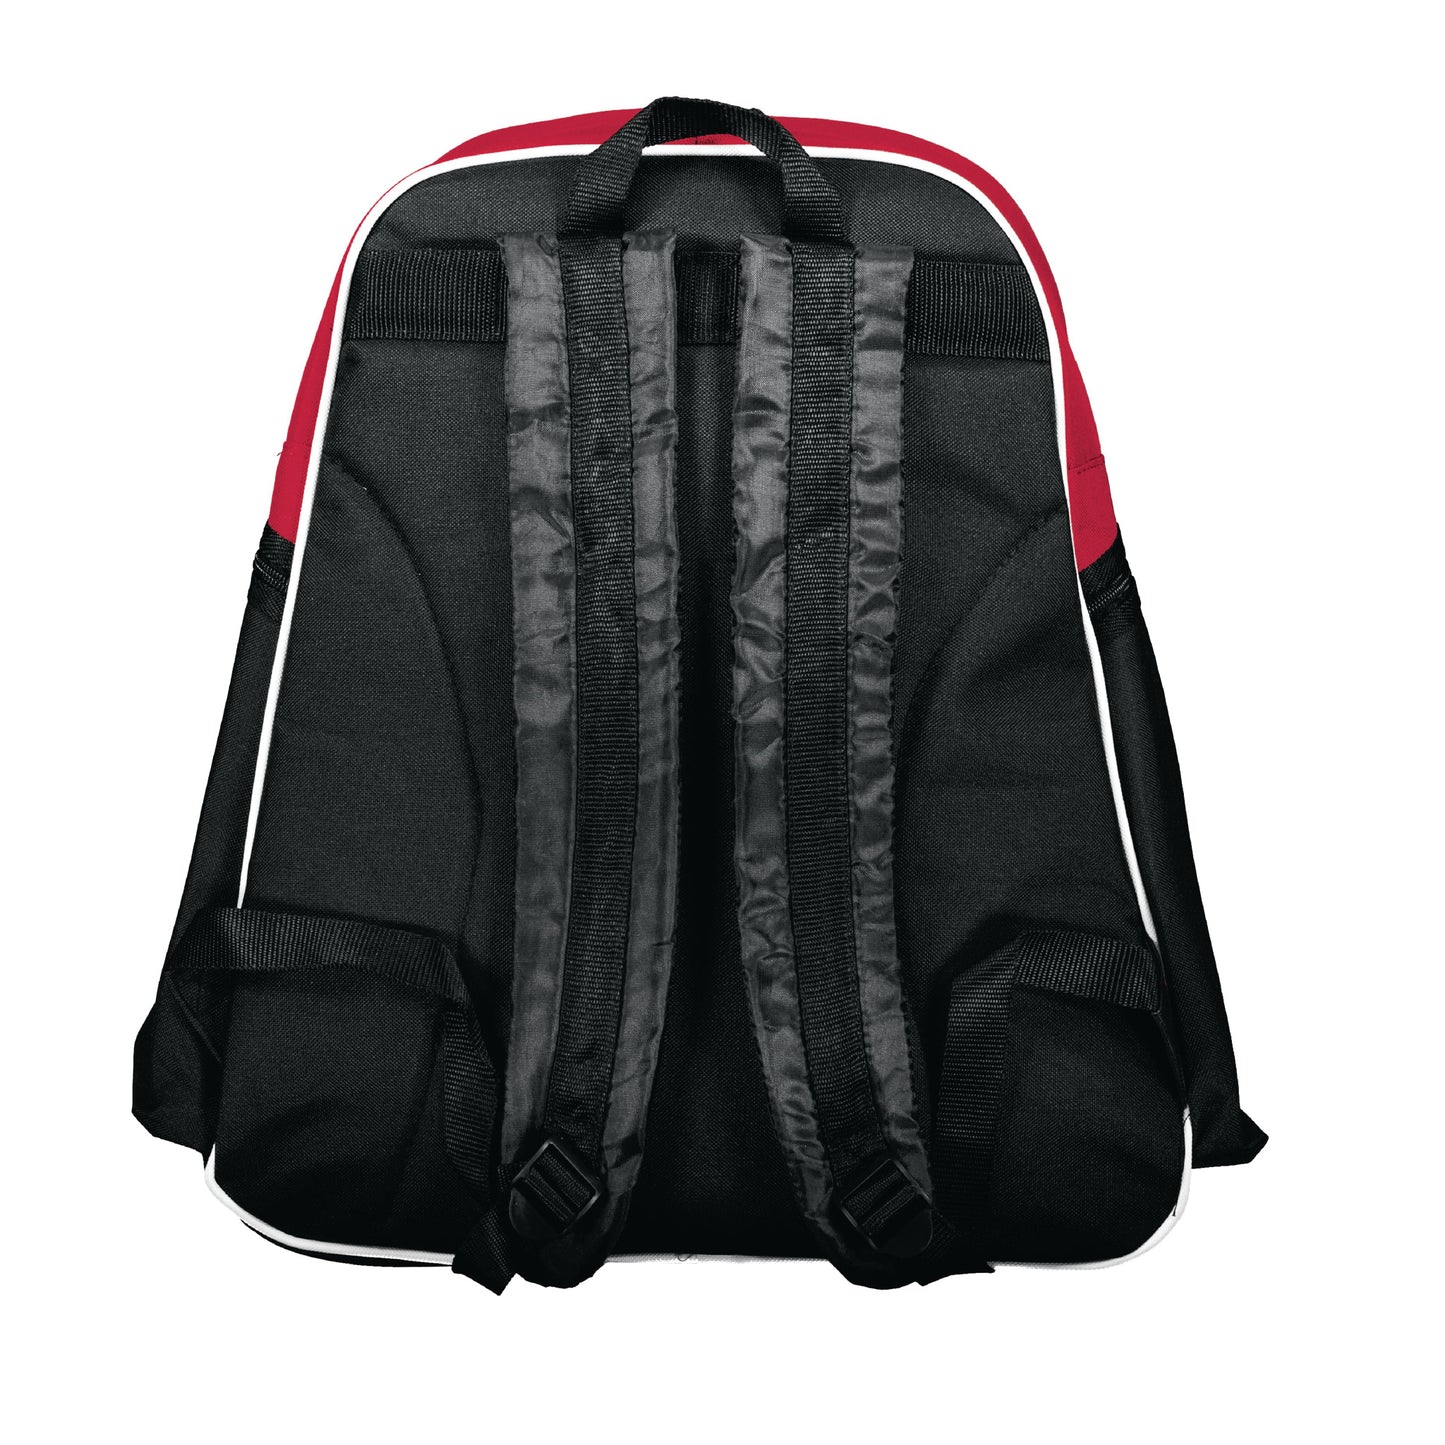 High Five Player Backpack